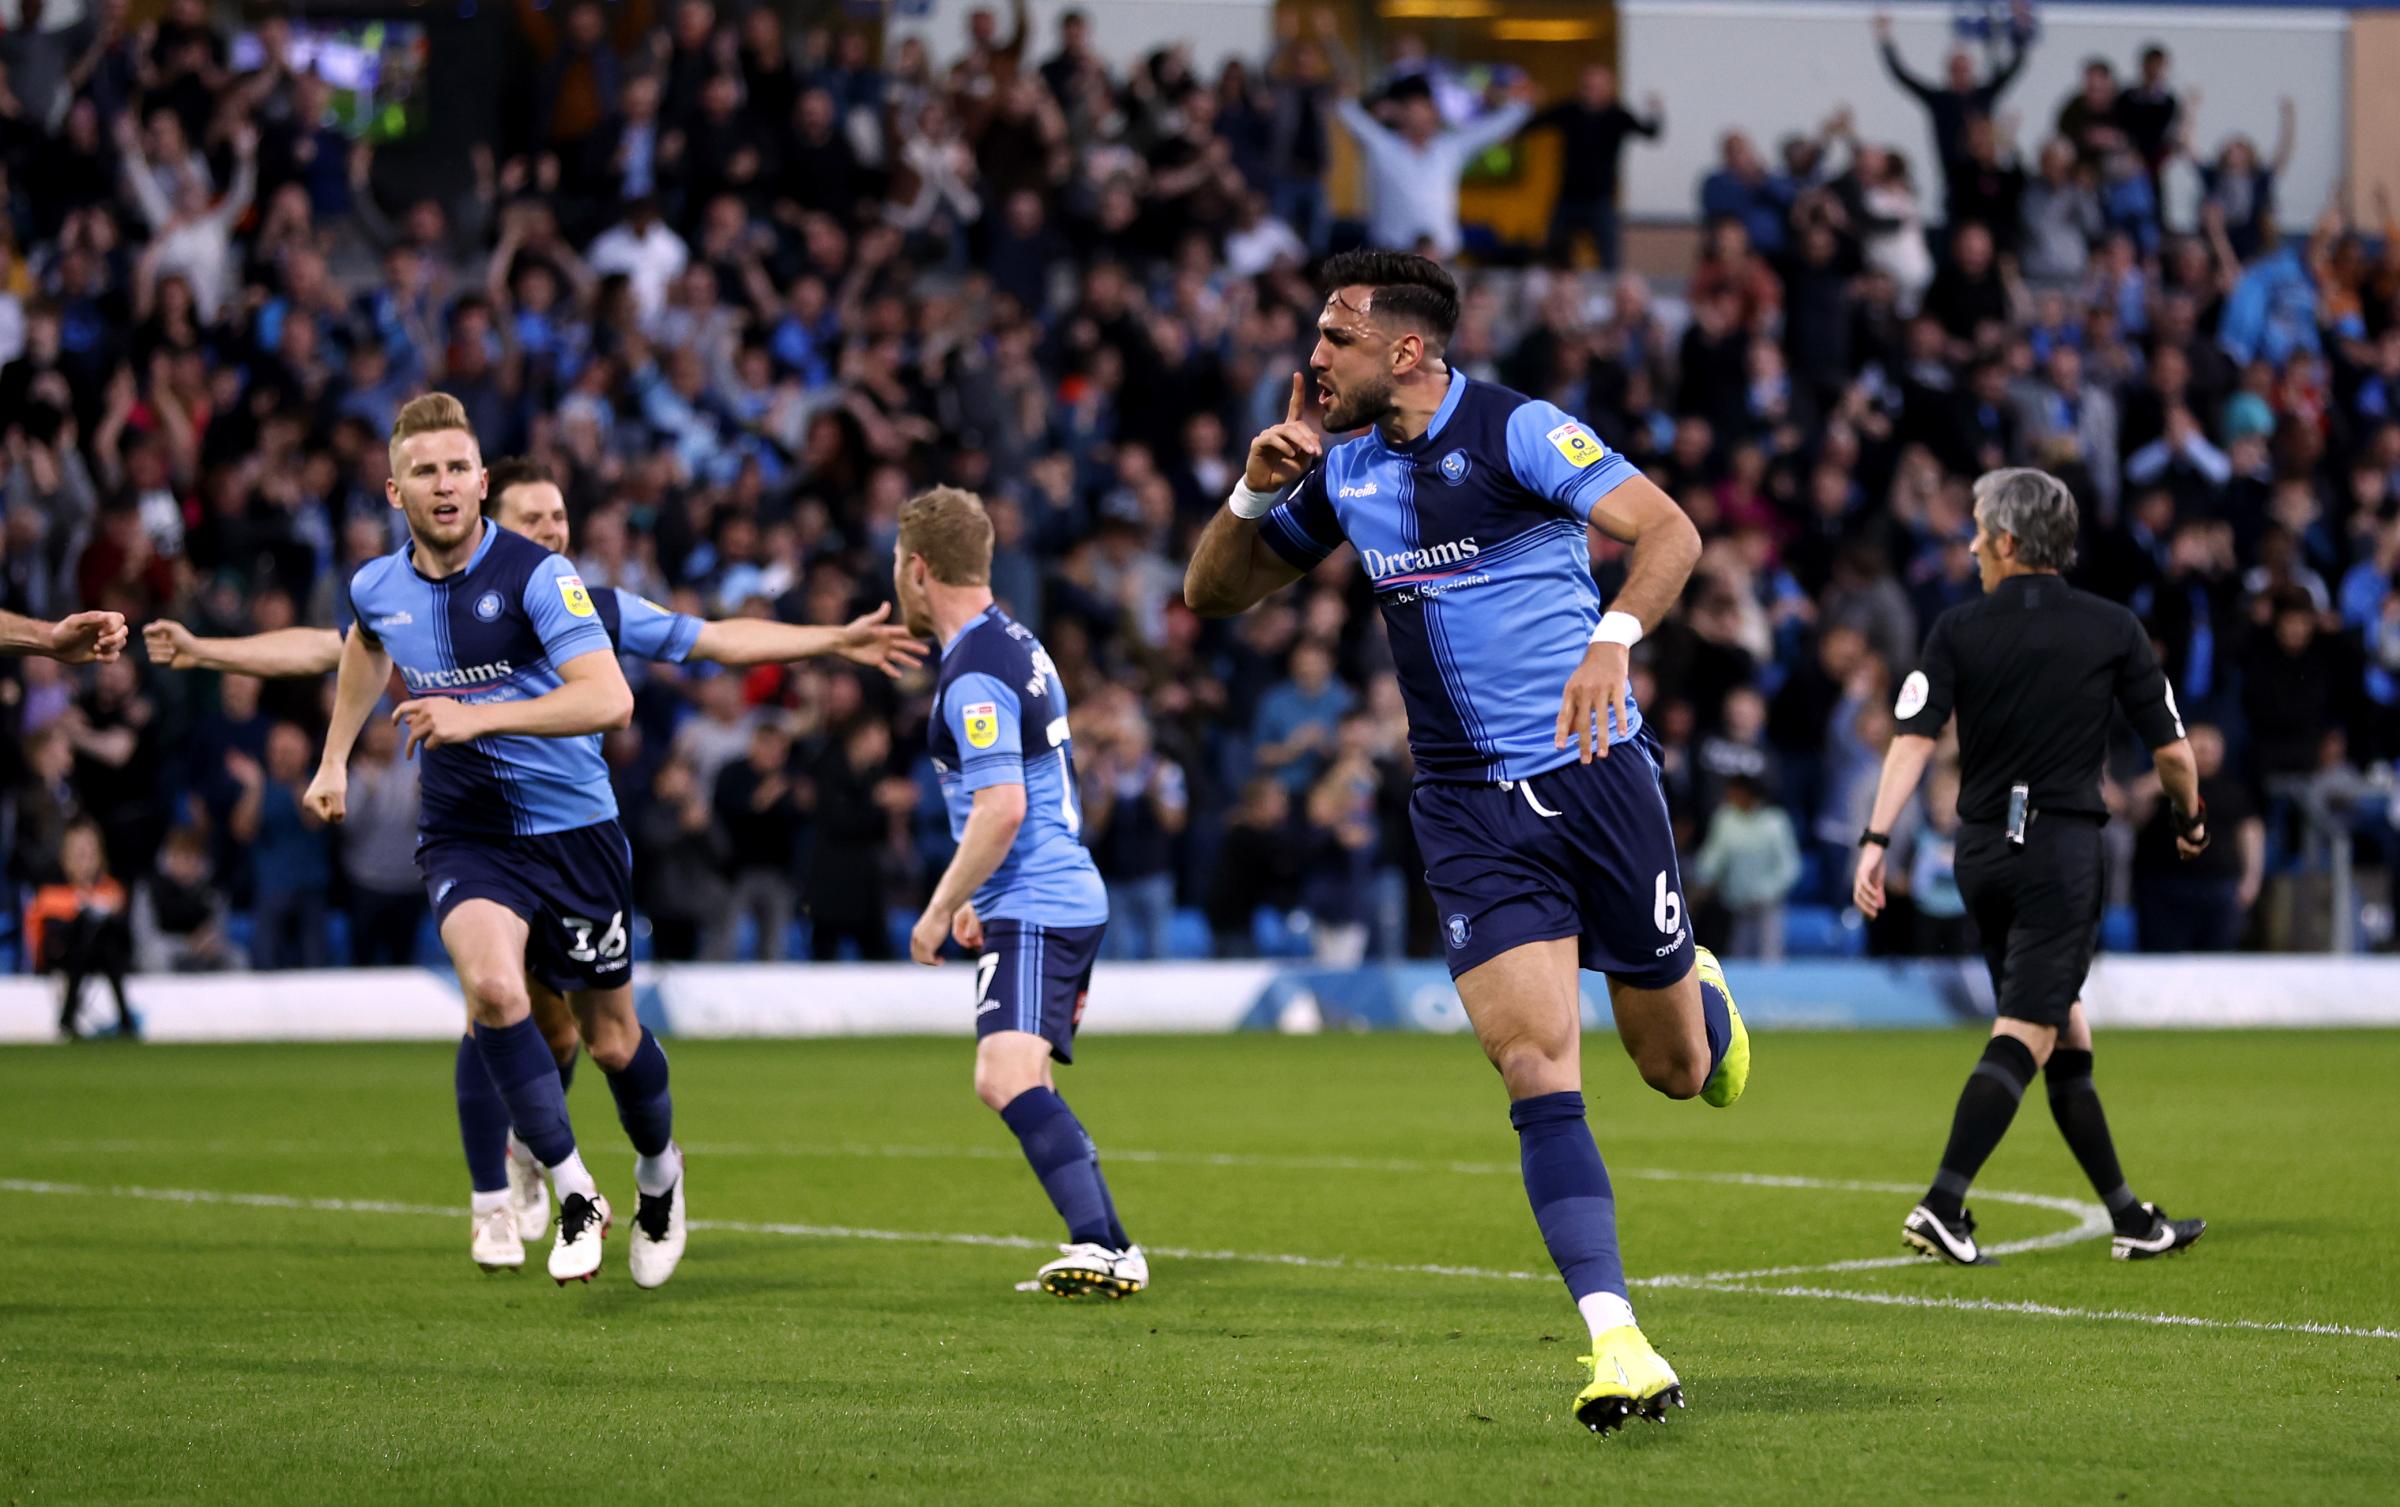 The place erupted as Wycombe took a 1-0 lead in the tie in the first leg (PA)